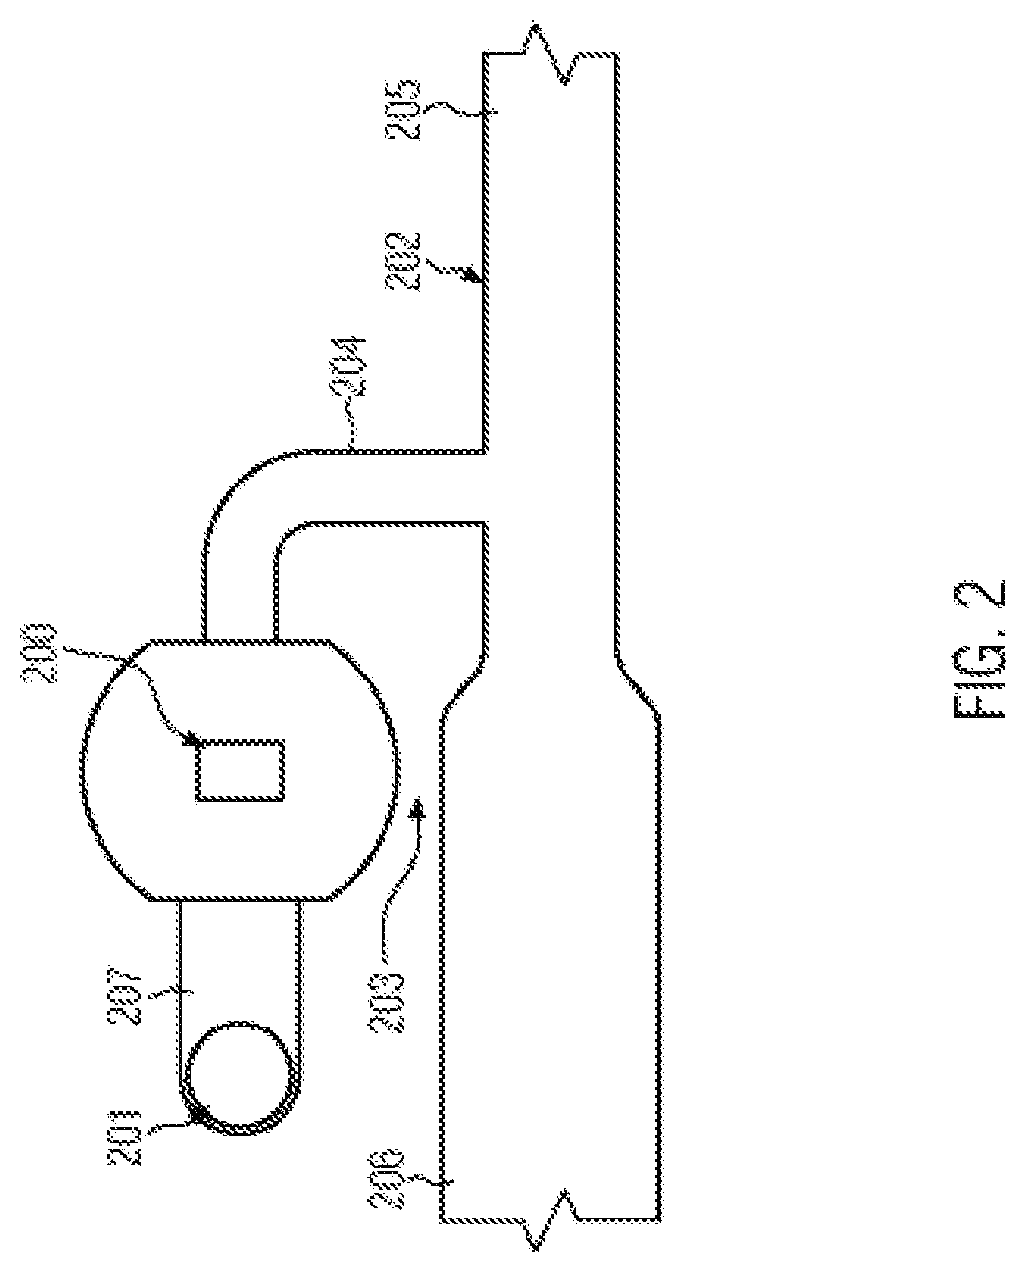 Spring-type battery contact having sensor protection